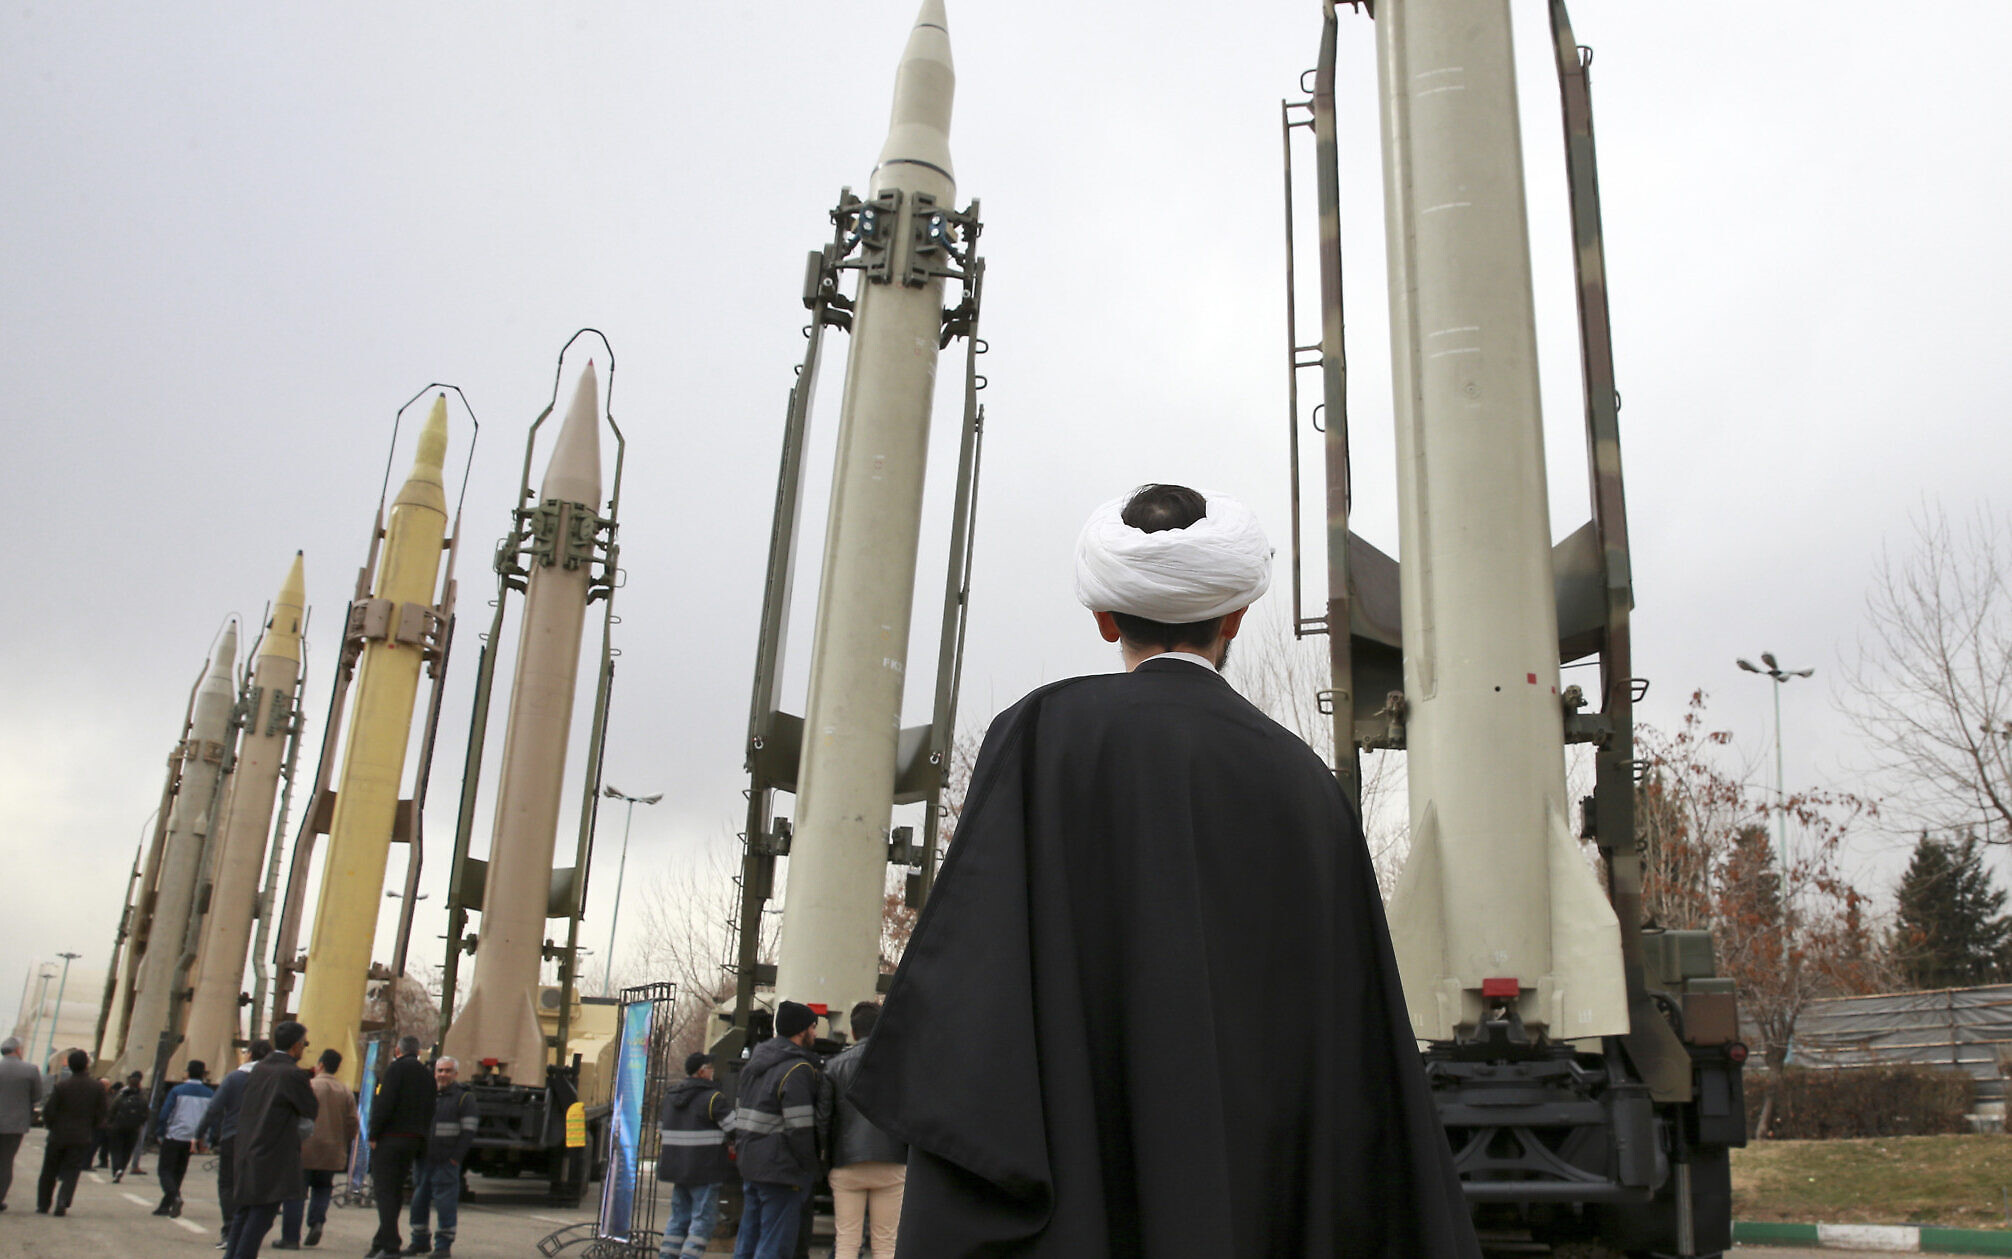 UN arms embargo lifted; Iran says it has right to buy weapons